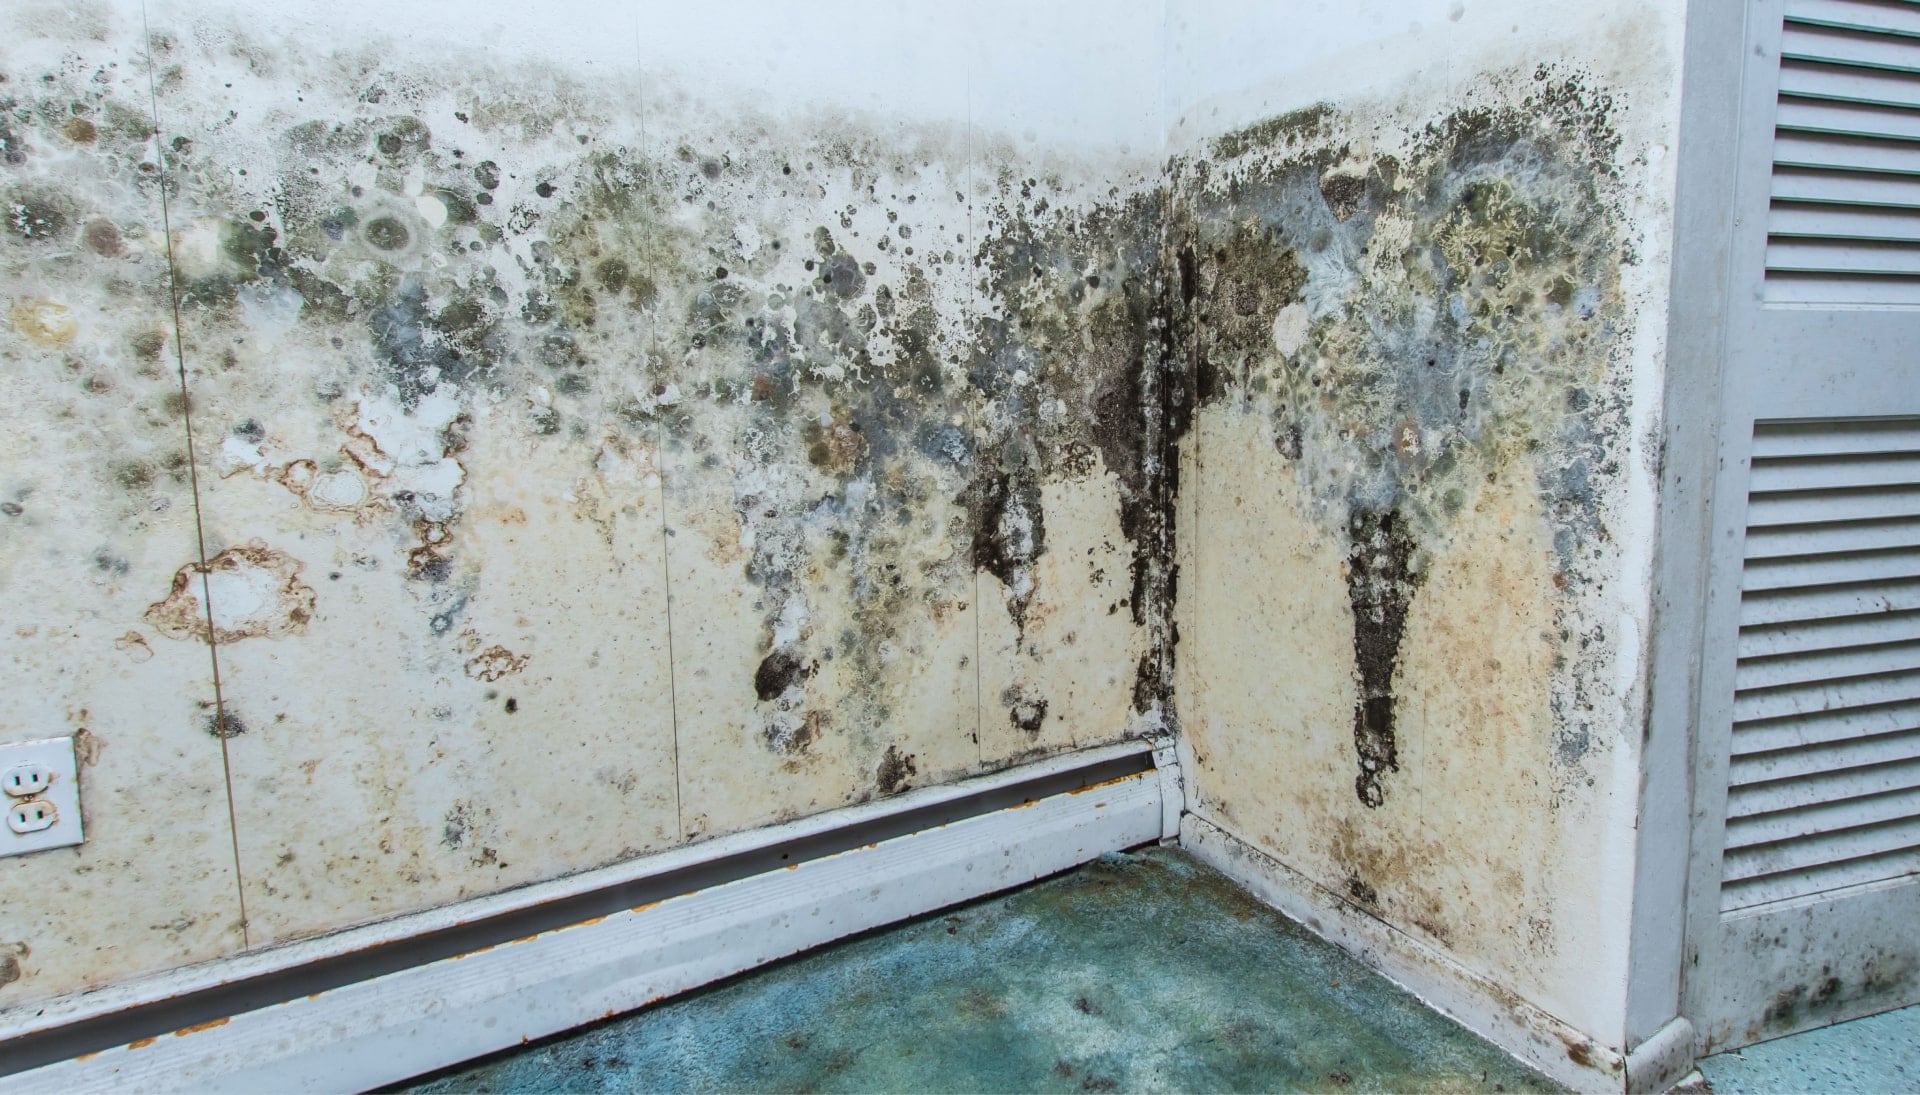 Professional mold removal, odor control, and water damage restoration service in San Francisco, California.